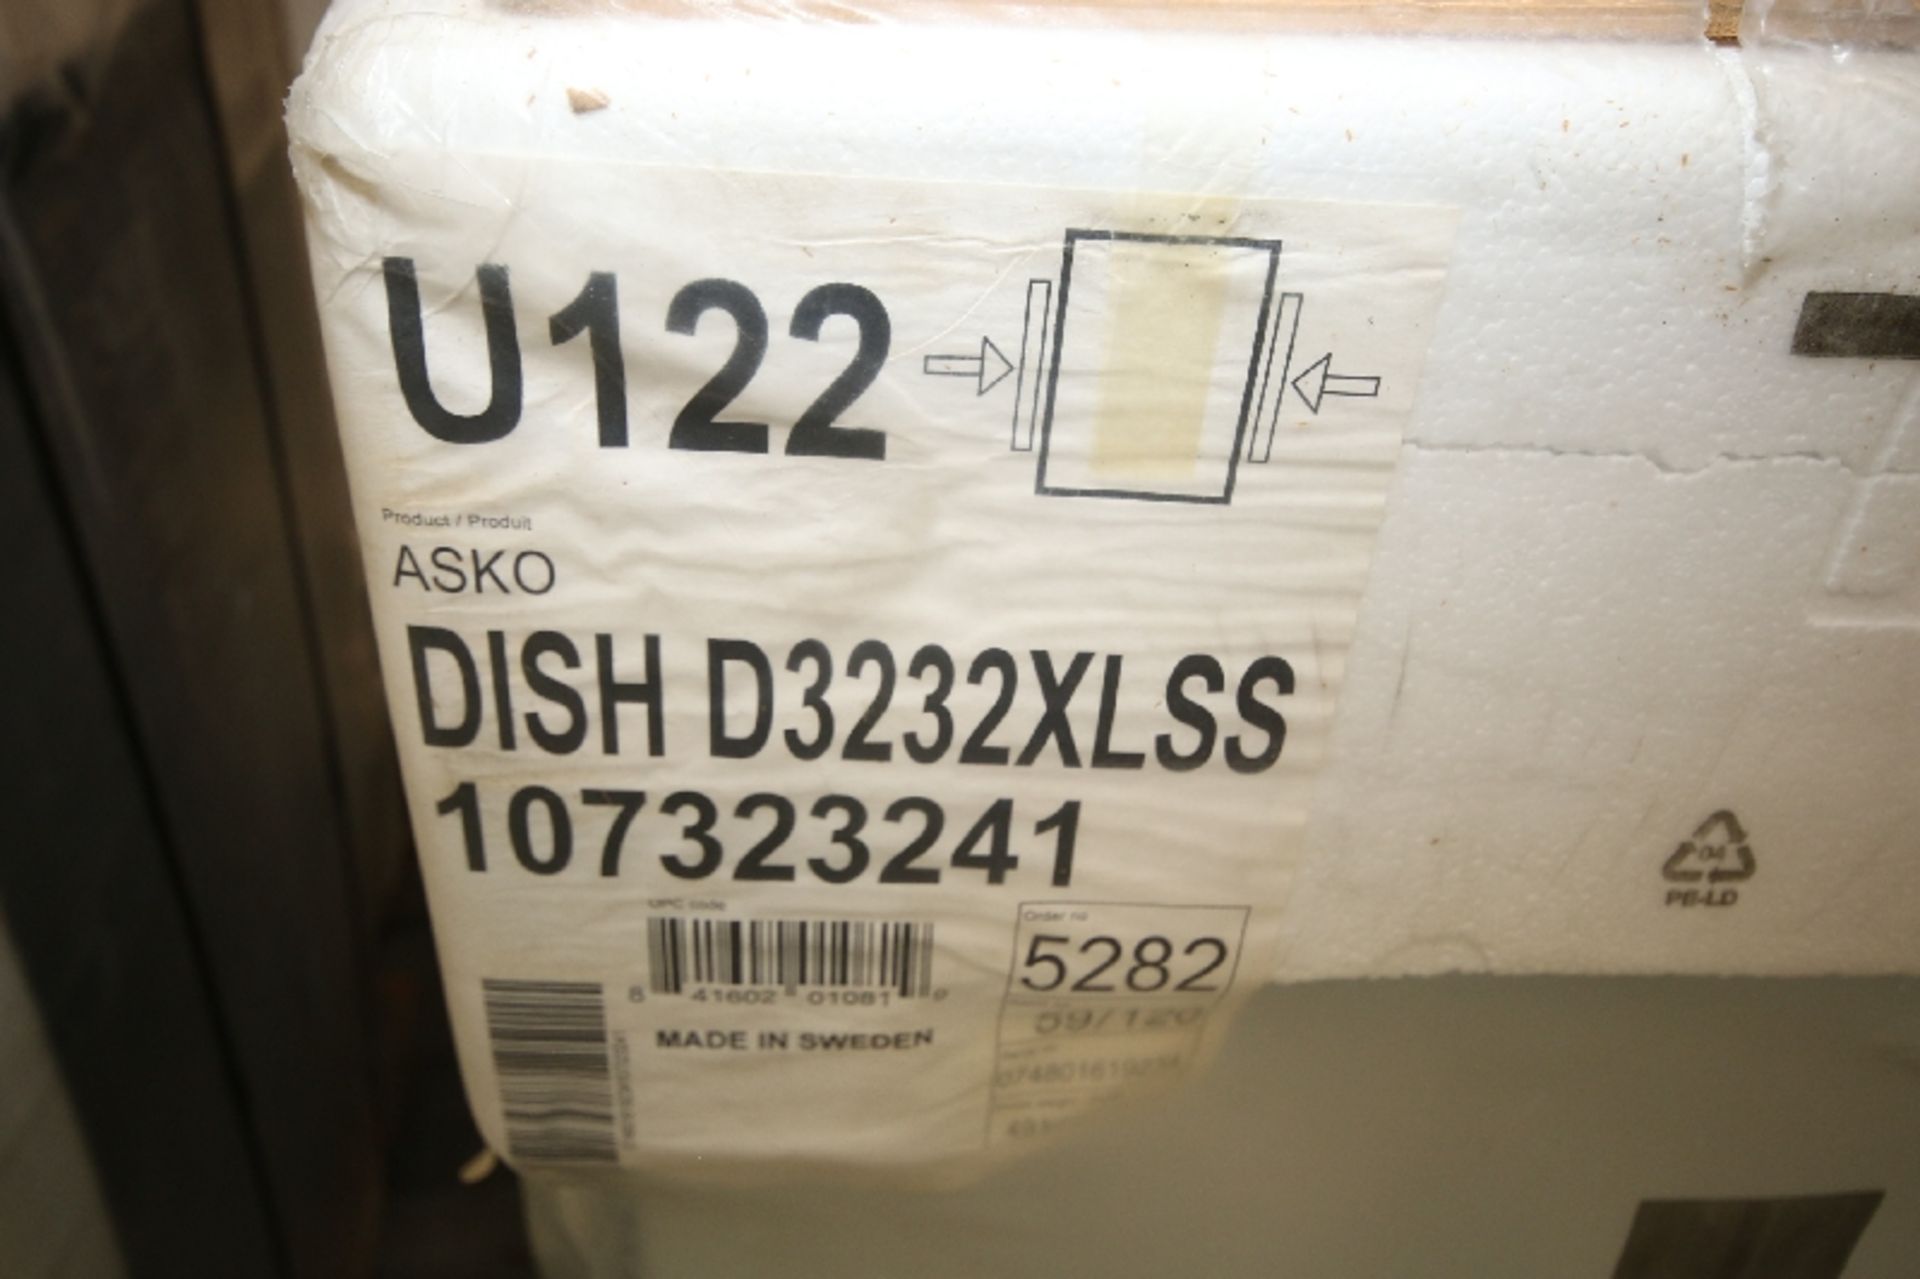 New Asko S/S Dishwasher, Model D3232XLSS107323241, S/N 074801619234 - Image 4 of 4